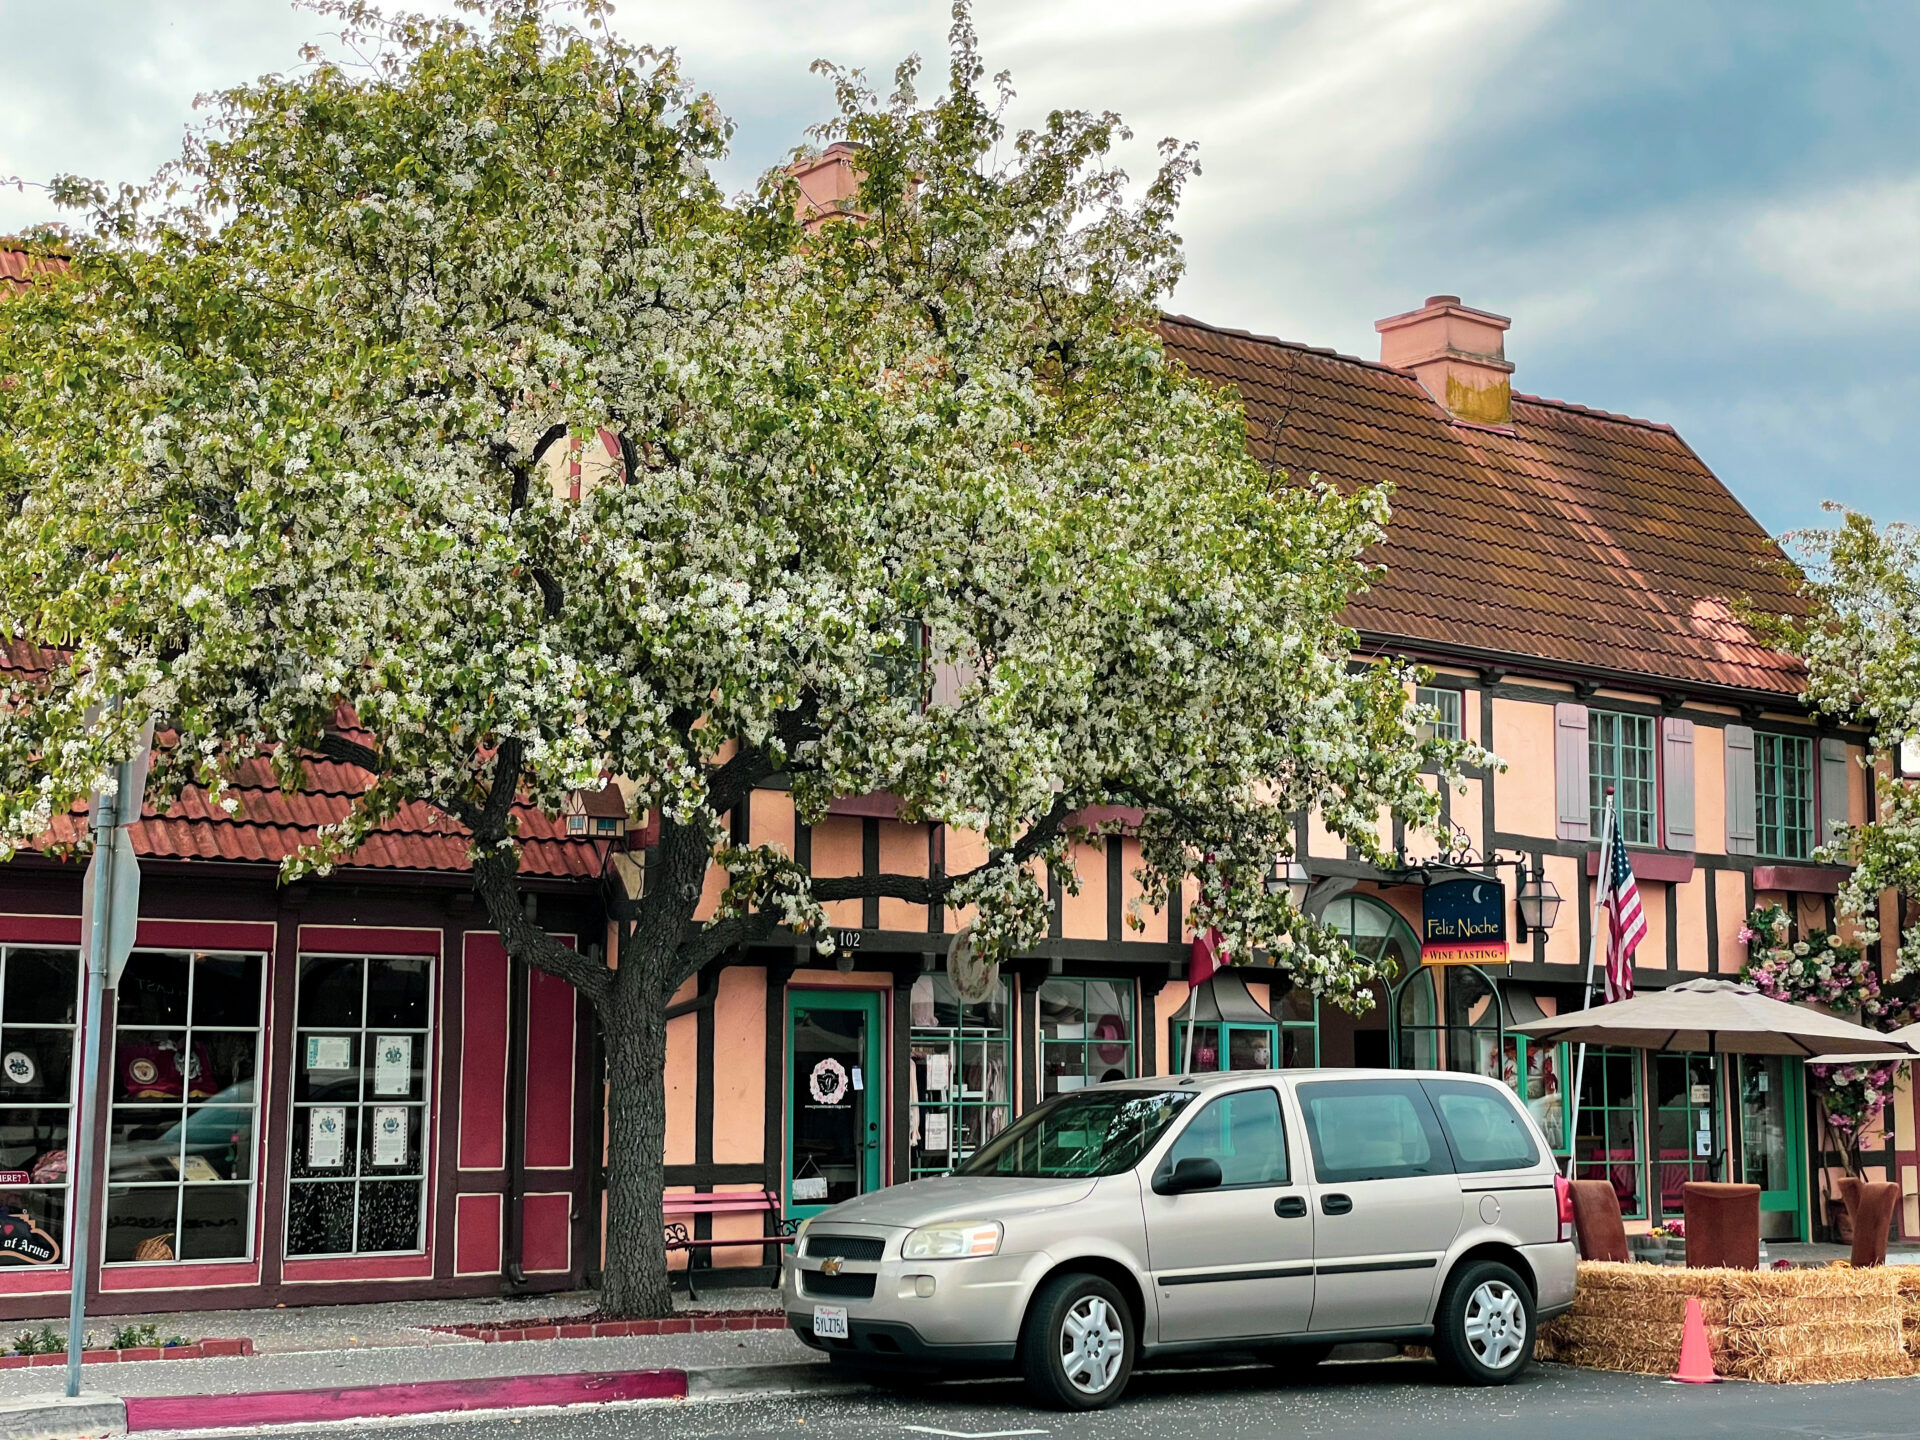 Traveling to Solvang, California